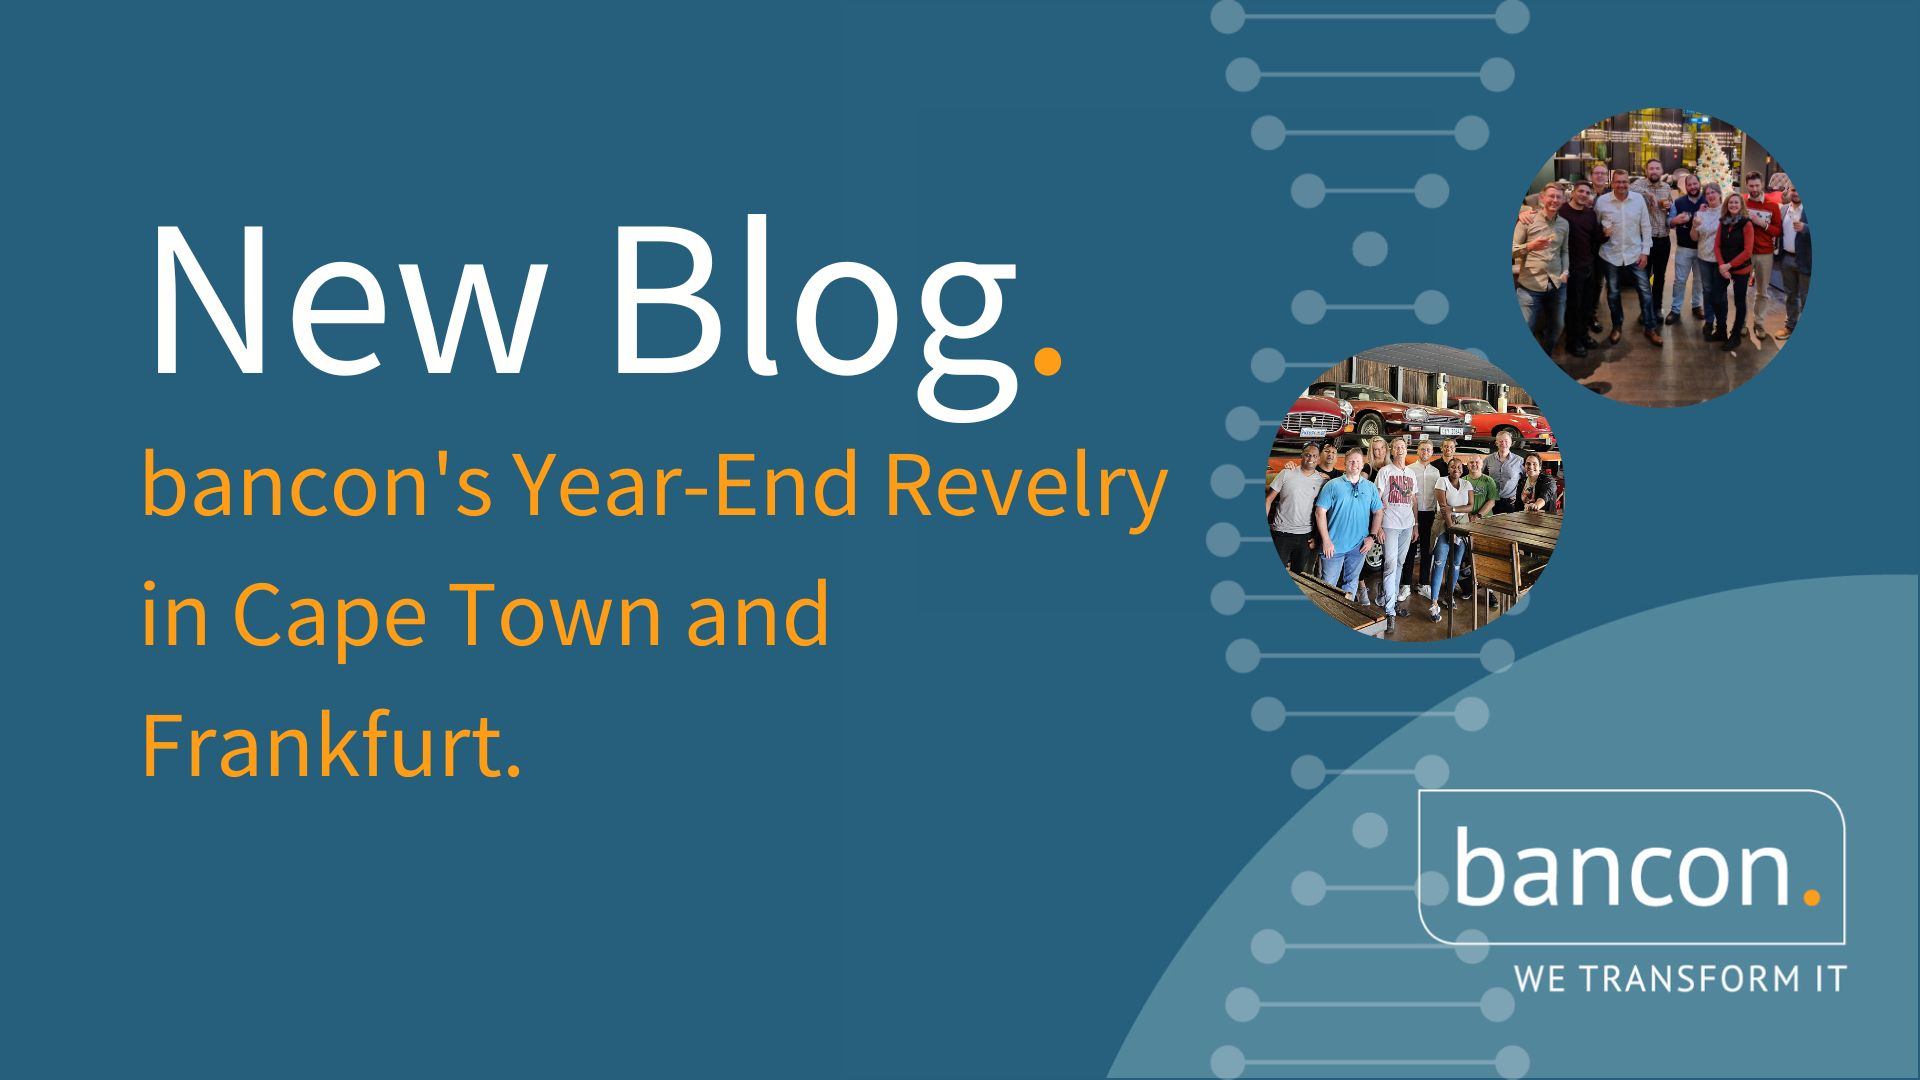 bancon's Year-End Revelry in Cape Town and Frankfurt